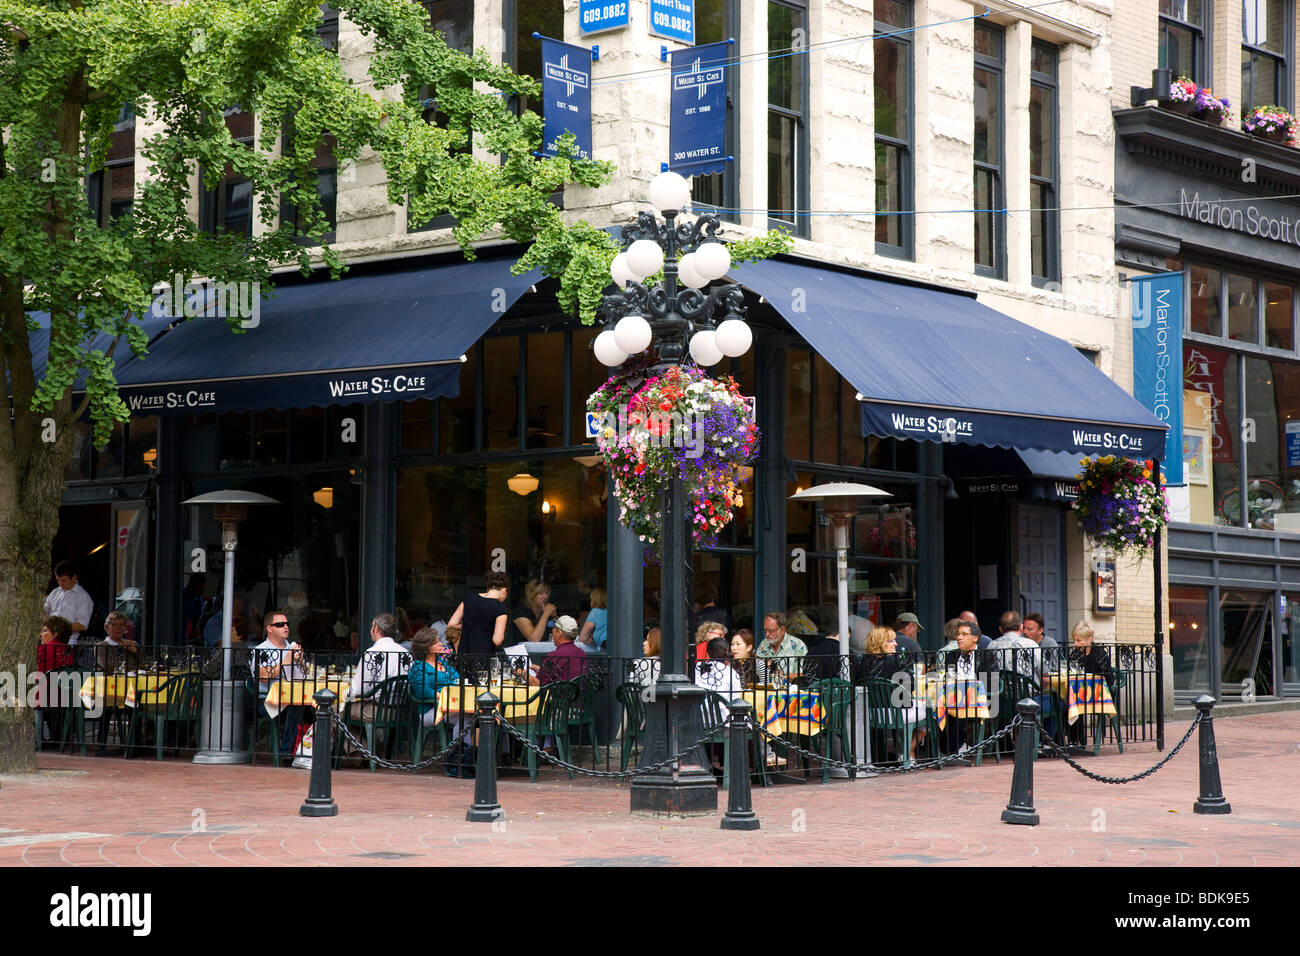 Water Street Cafe, Gastown District, downtown Vancouver, British Columbia, Canada. Stock Photo